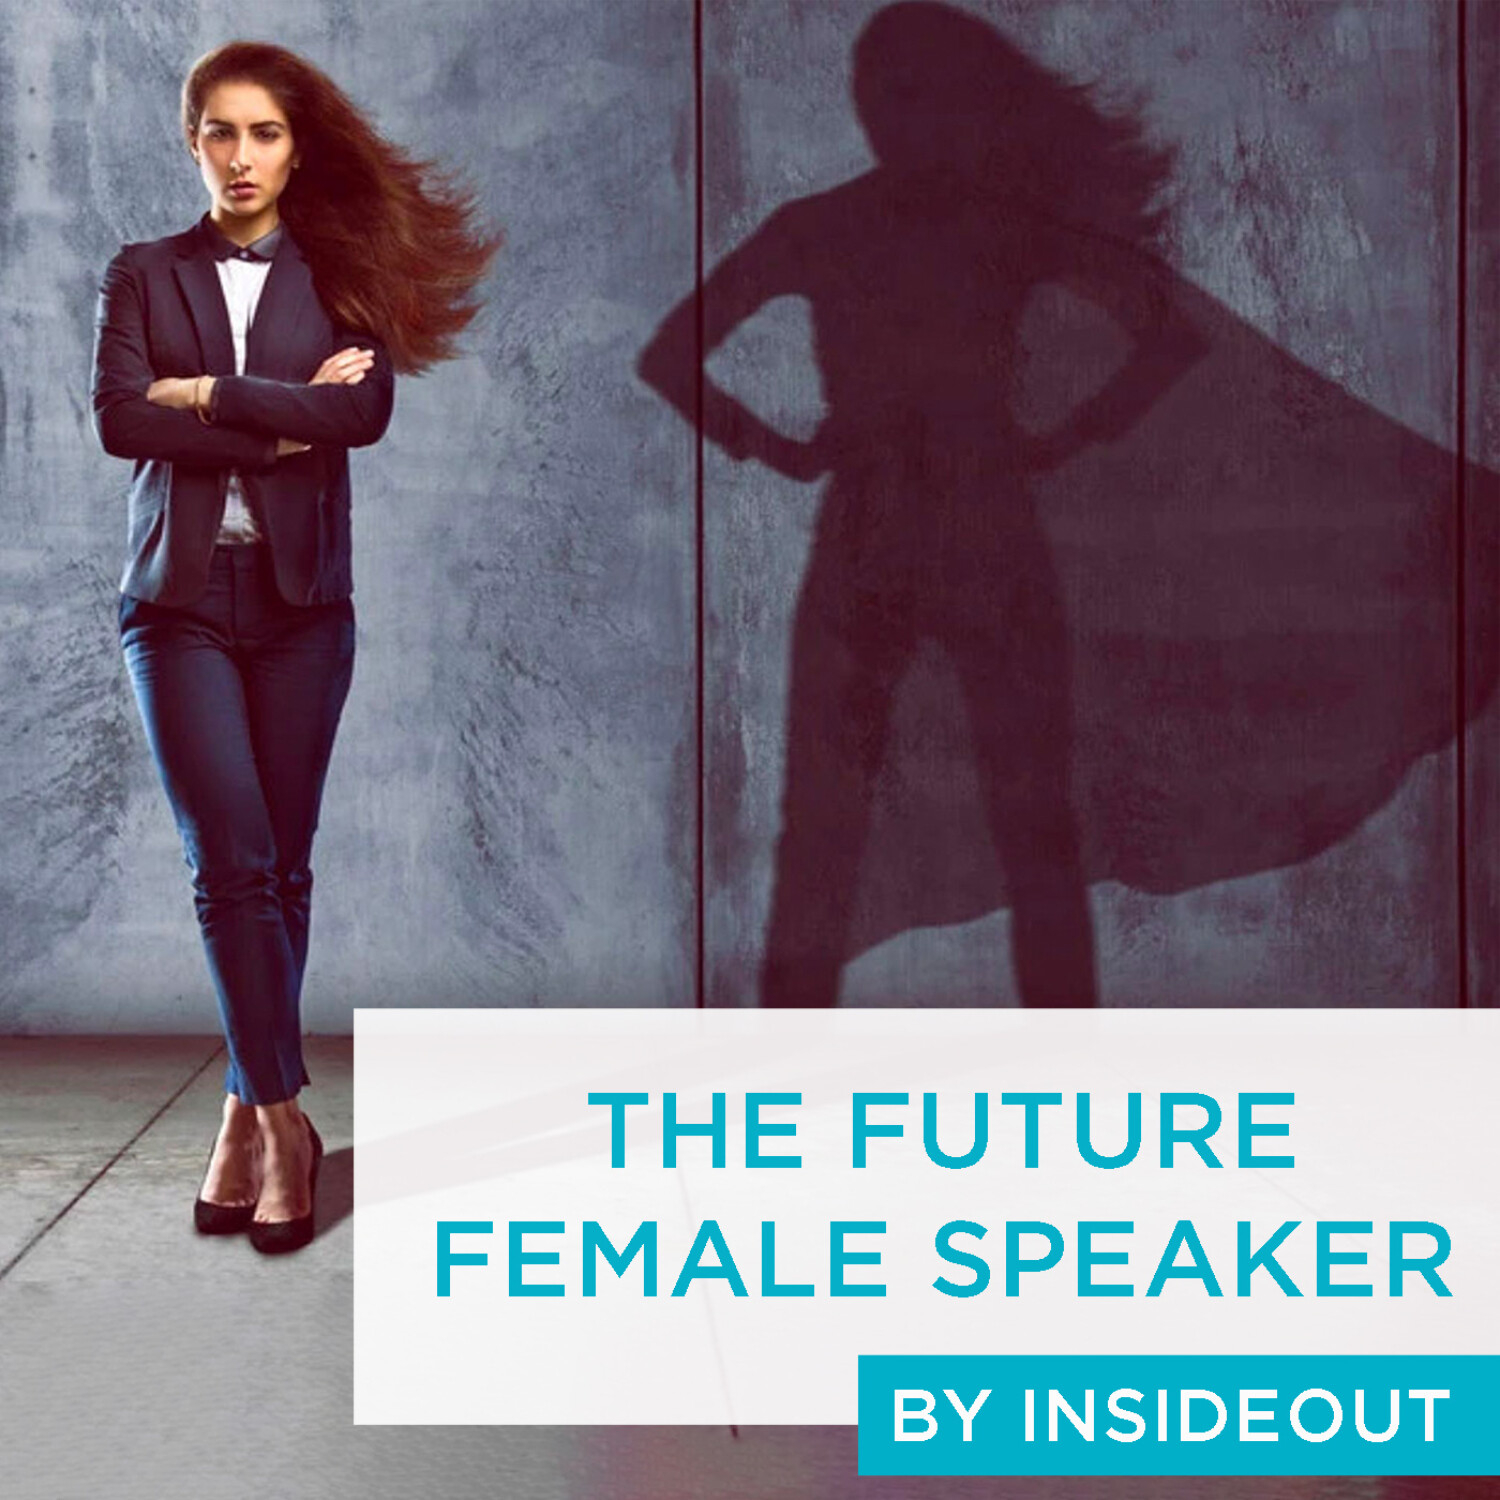 The Future Female Speaker, by InsideOut